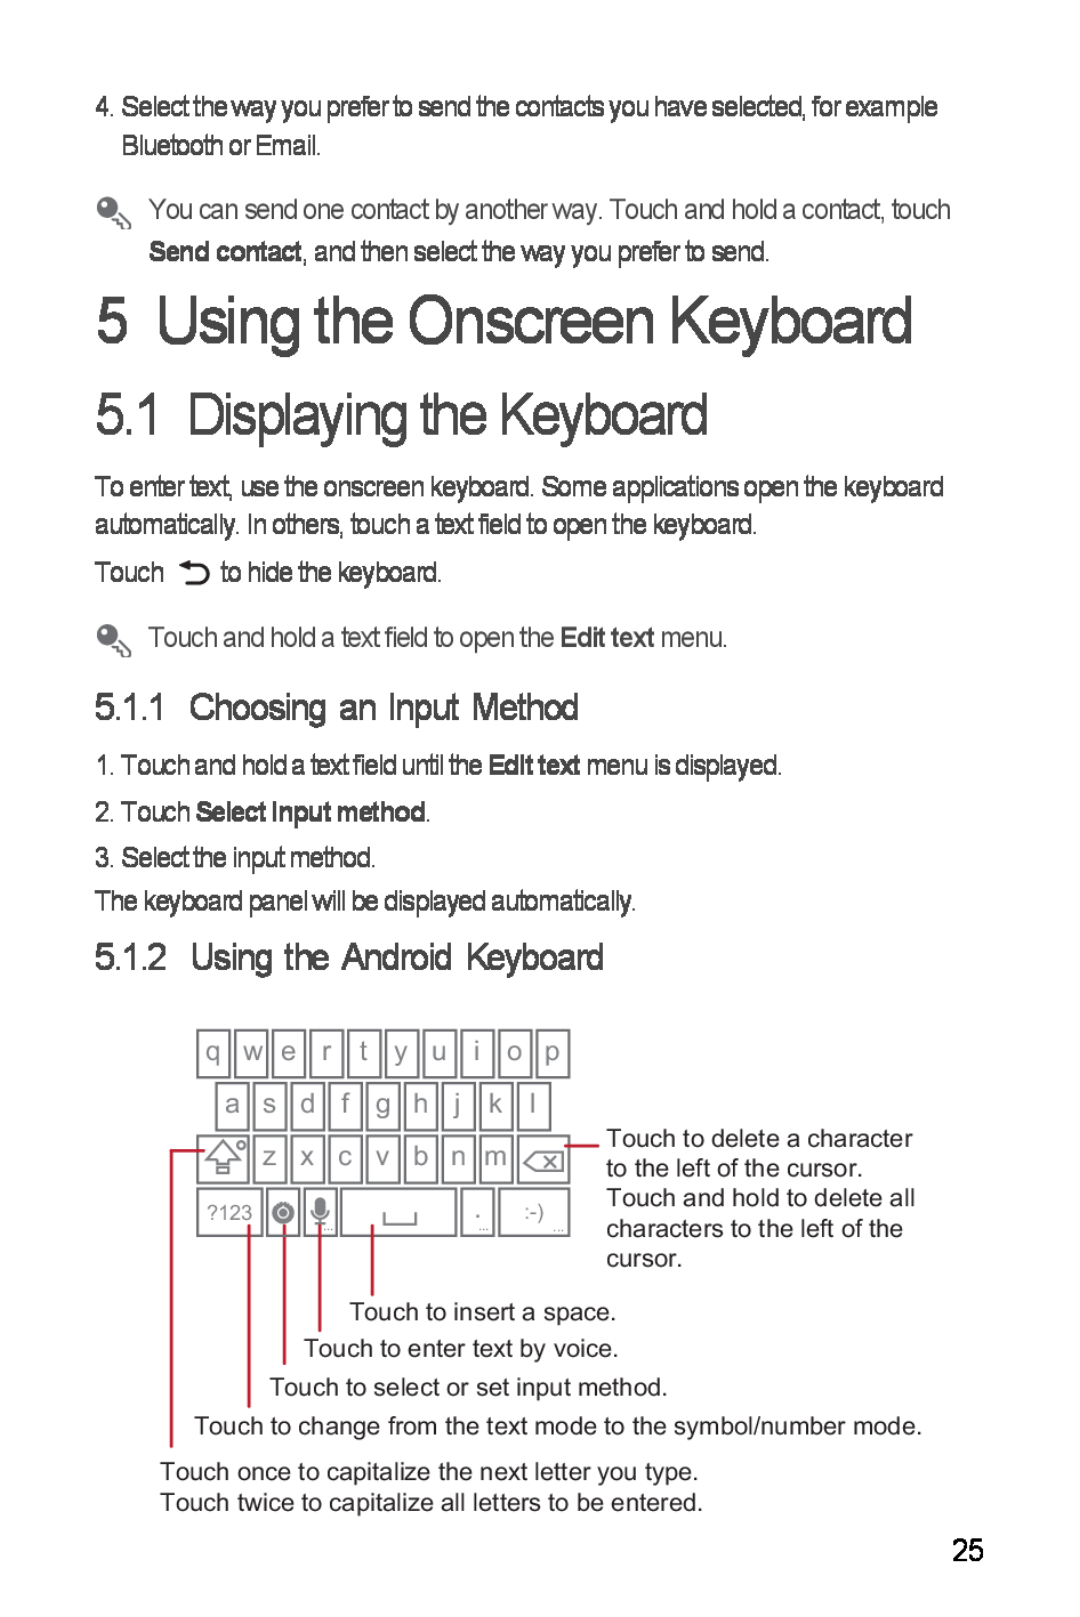 Huawei Ascend Y Using the Onscreen Keyboard, Displaying the Keyboard, Choosing an Input Method, Using the Android Keyboard 